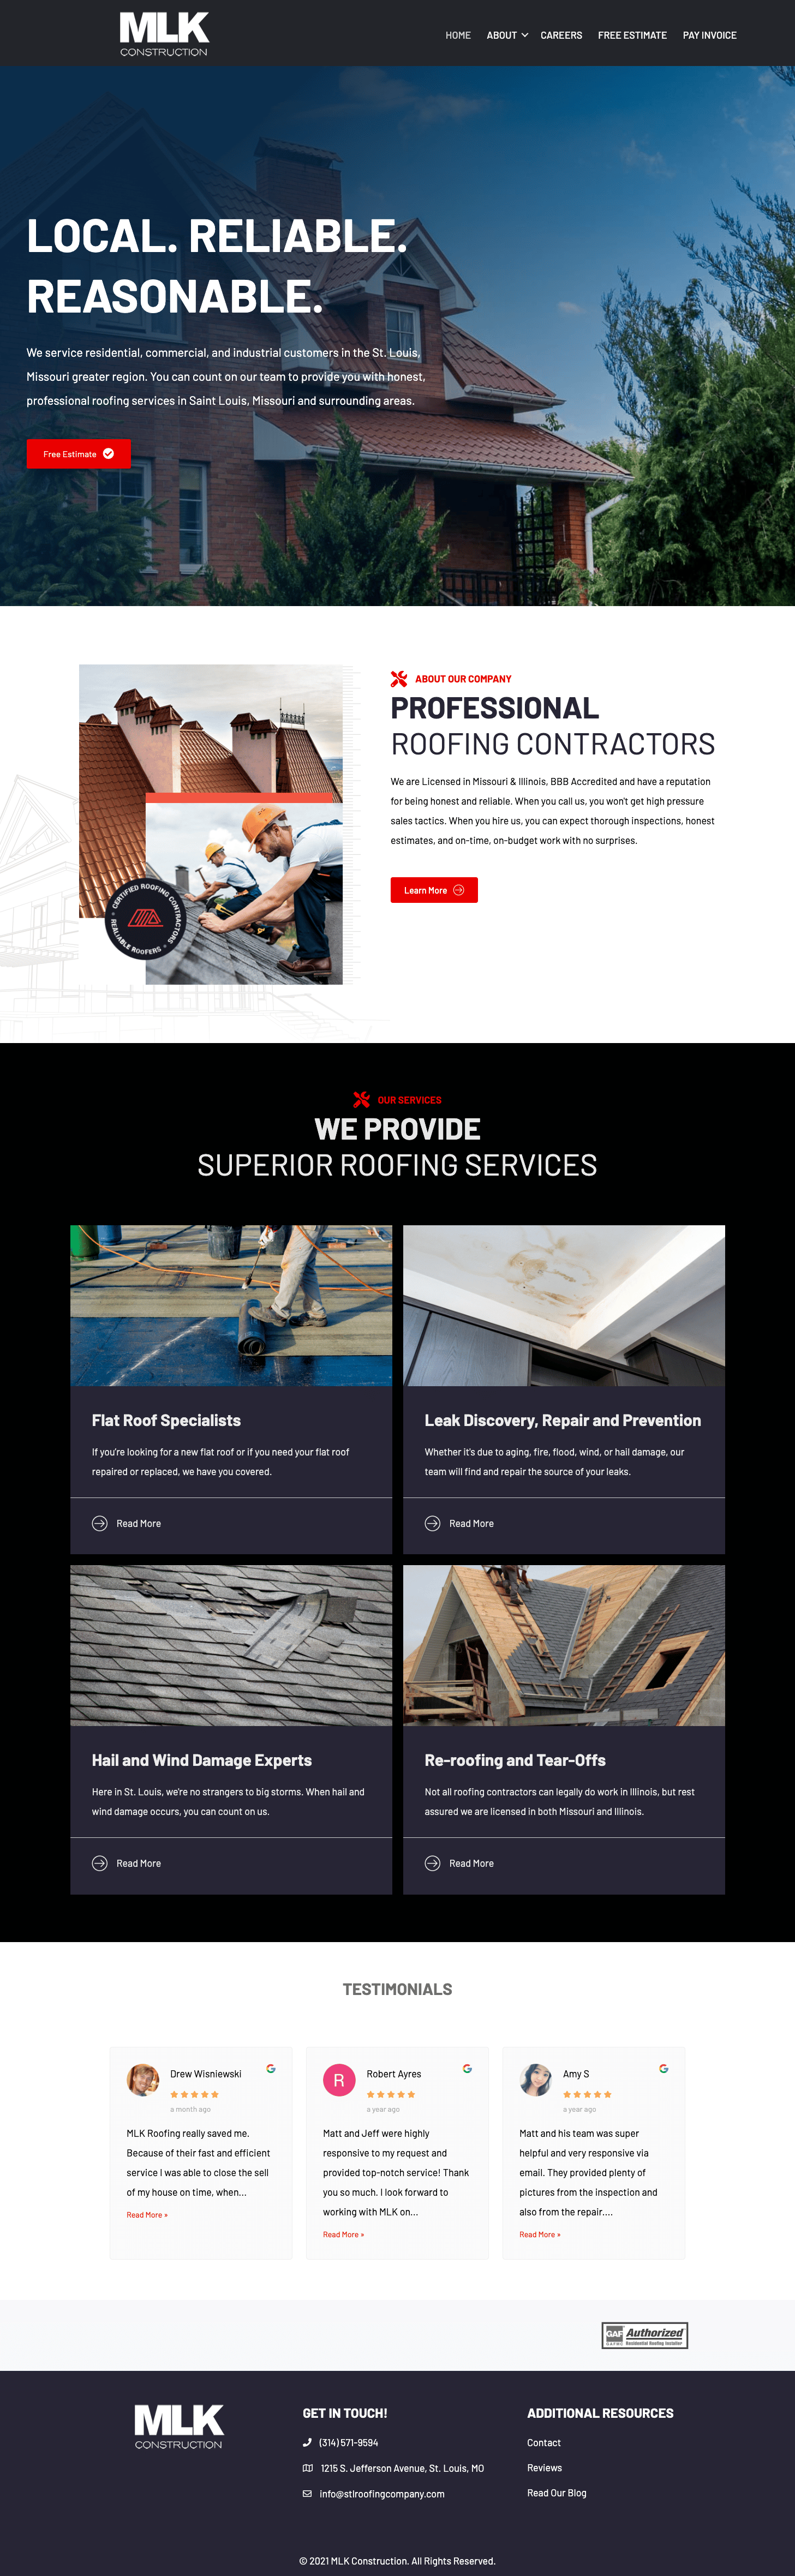 MLK Construction commercial roofing website example